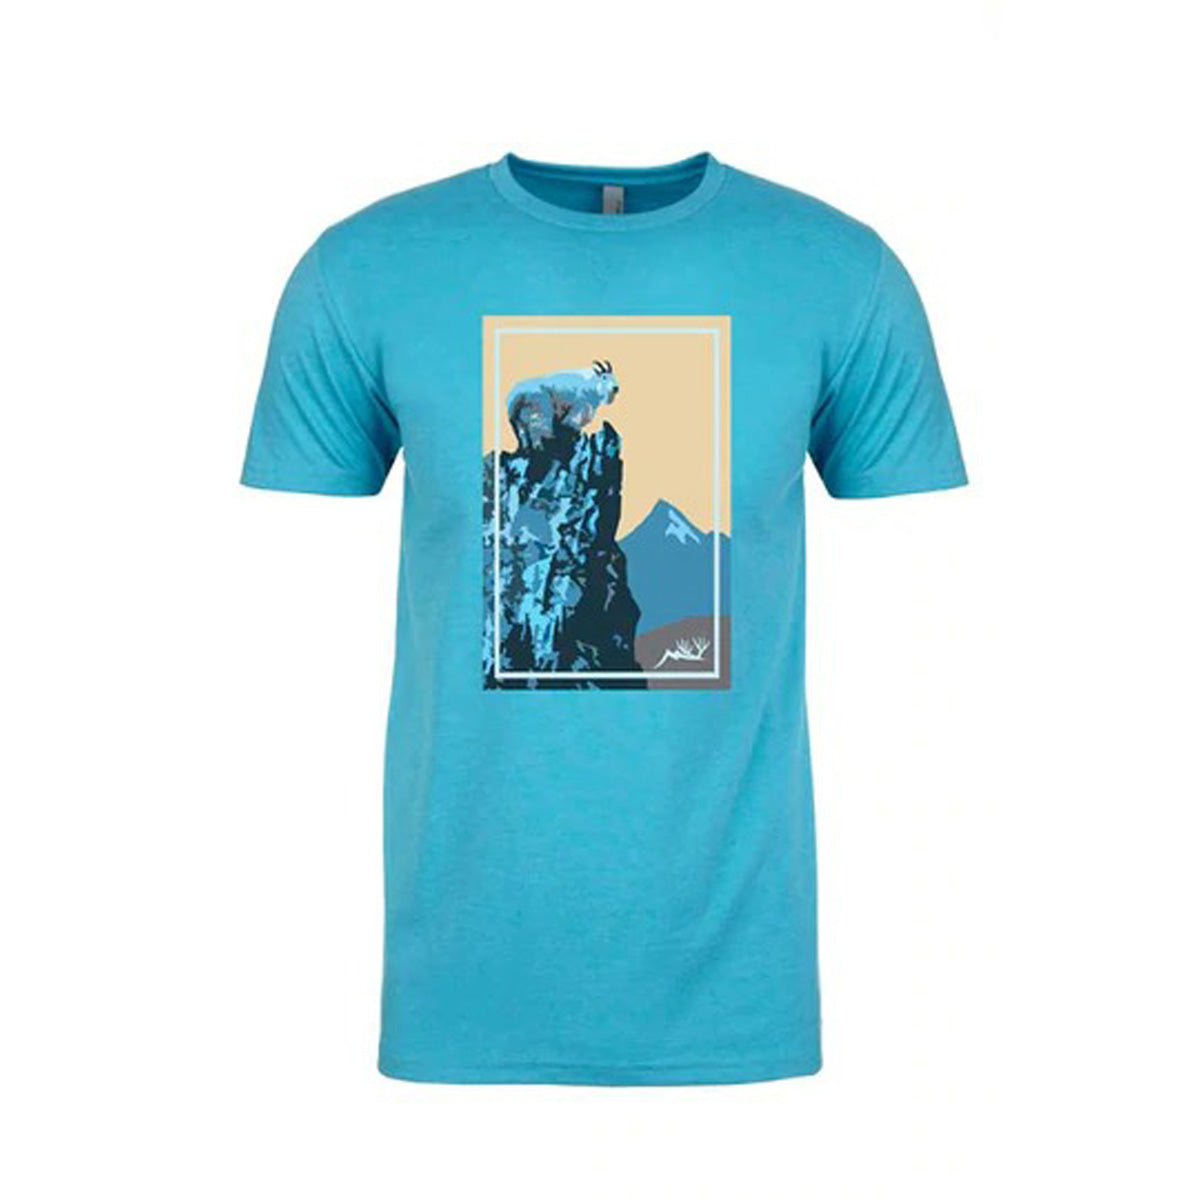 Blue T-shirt featuring a Mountain Goat perched on a cliff edge.